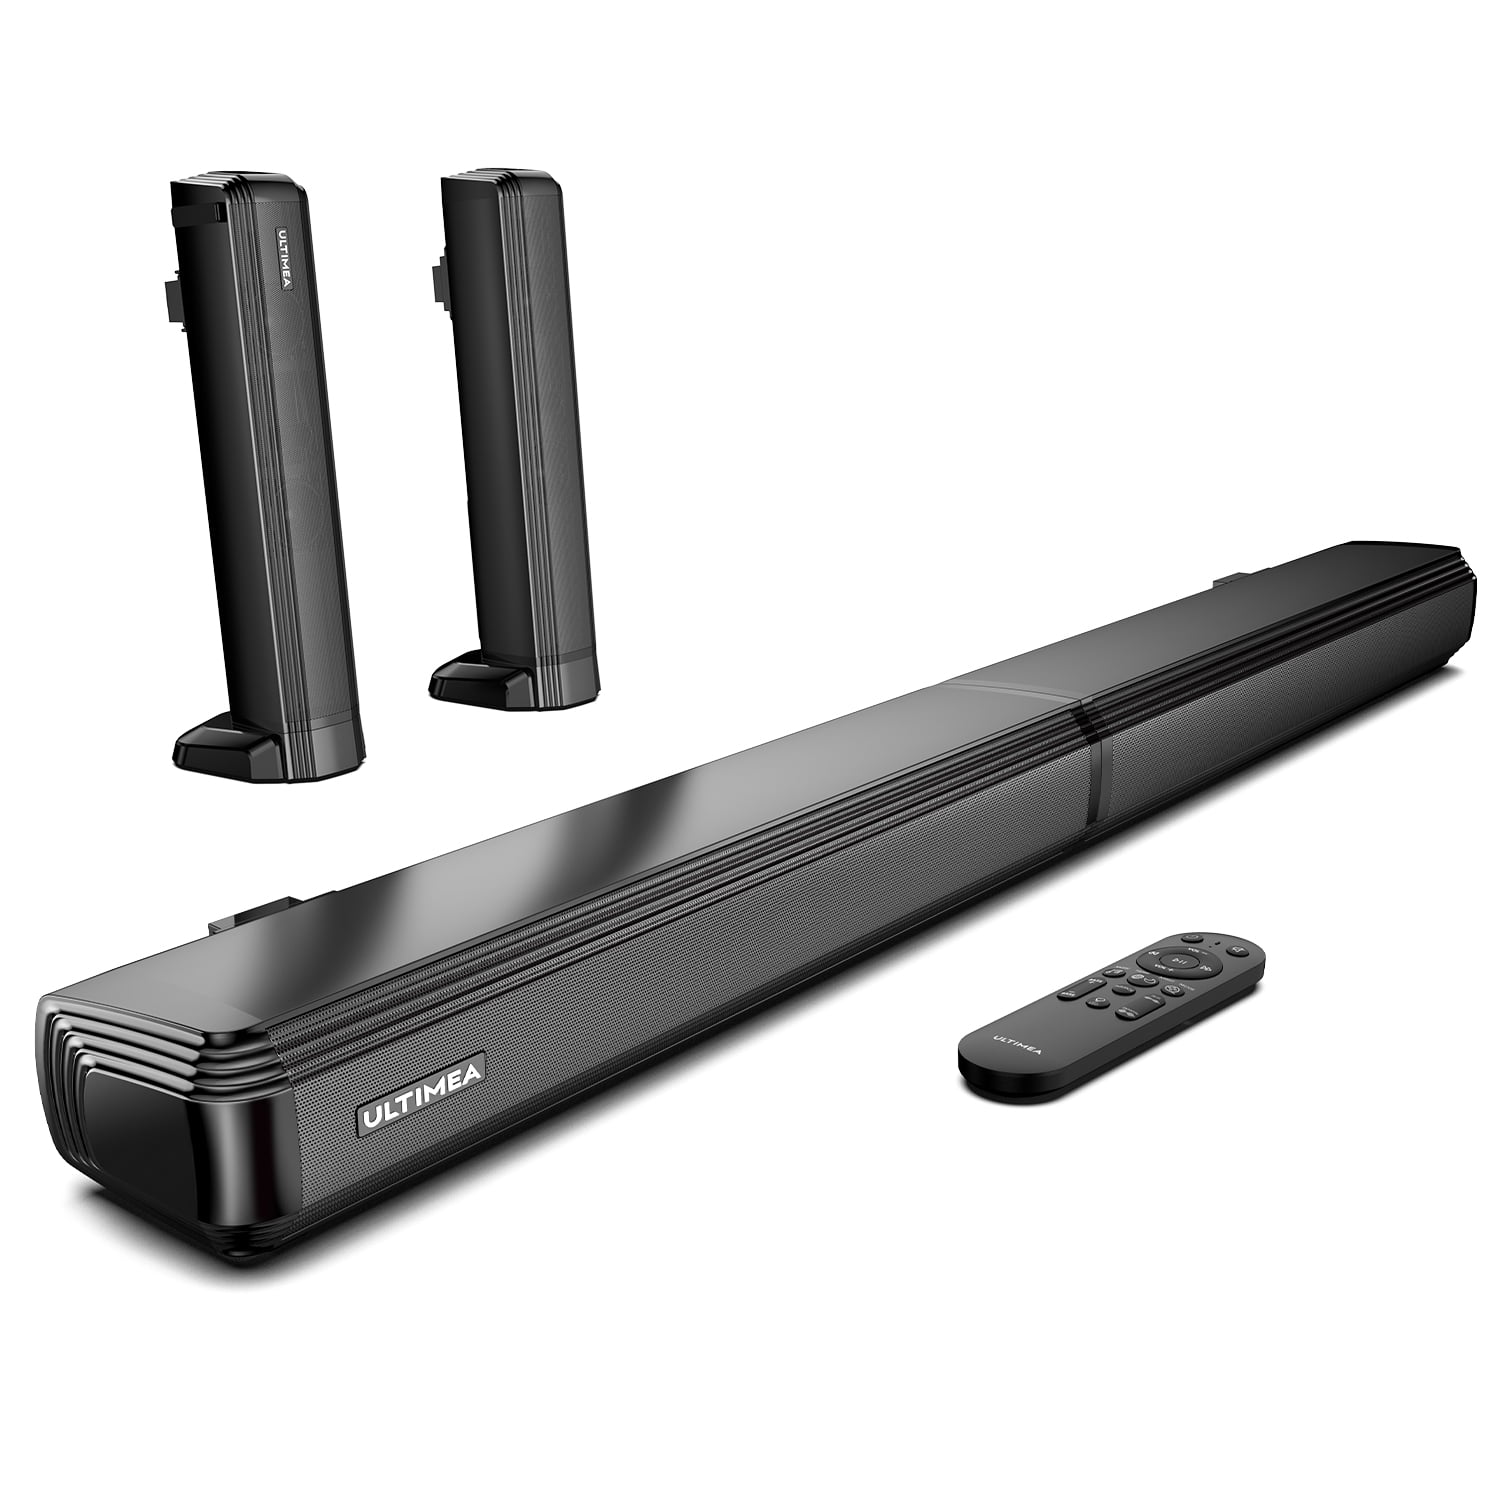 ULTIMEA 2.2ch Bar for TV, 2 in 1 Separable Speakers Design Soundbar for TV, Built-in 2 Tweeters and Woofers, Bluetooth 5.0 Sound Bars, ARC/Optical/Aux Home Theater Speakers, Wall Mount -